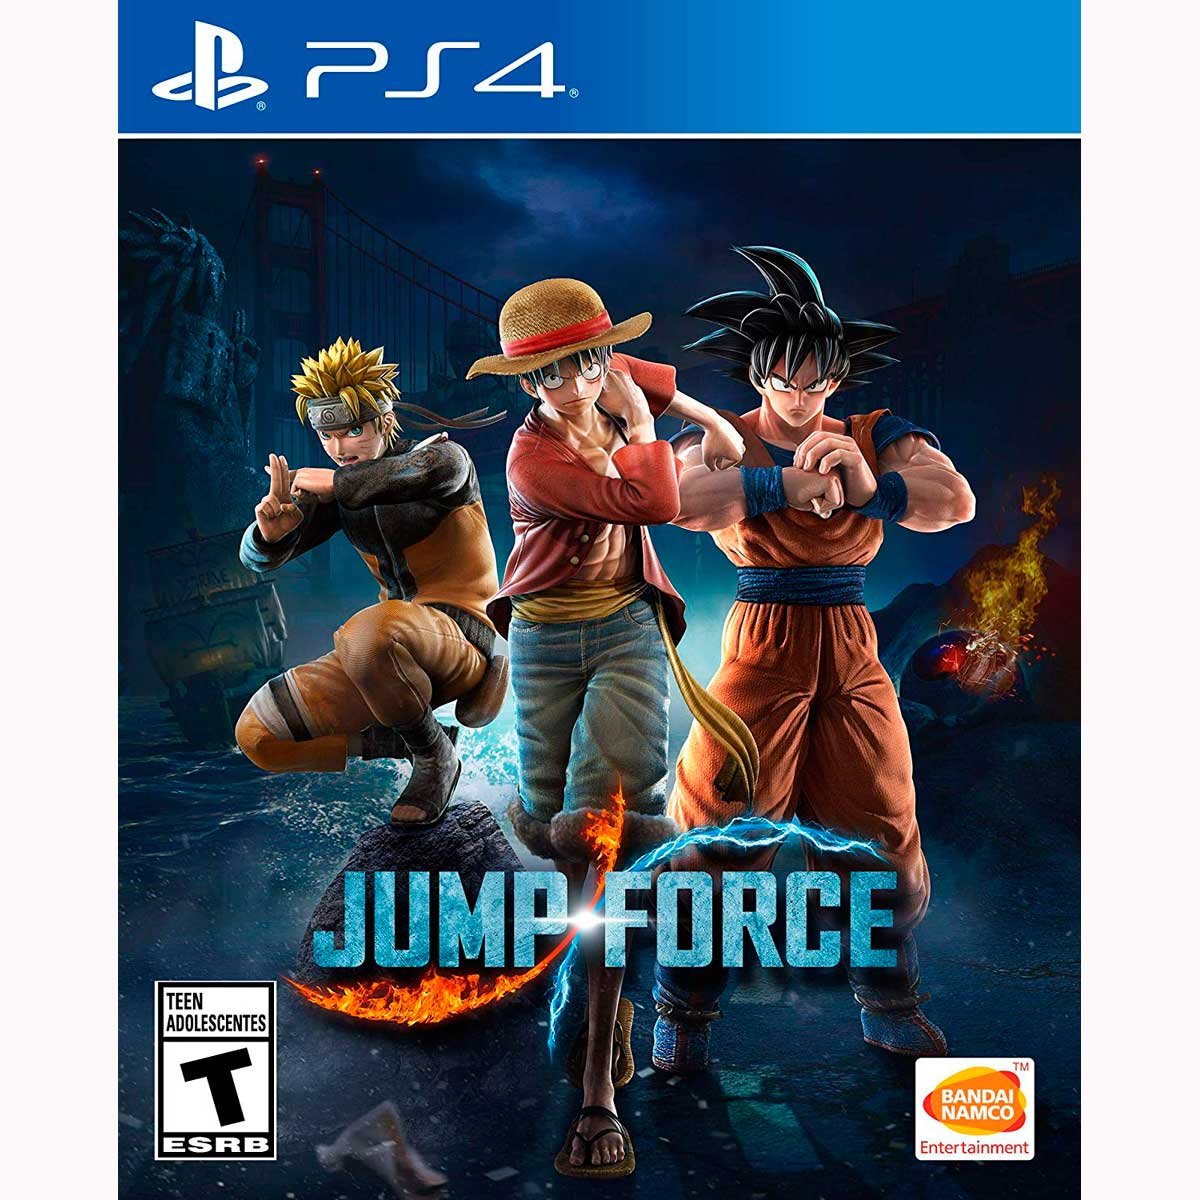 Ps4 Jump Force